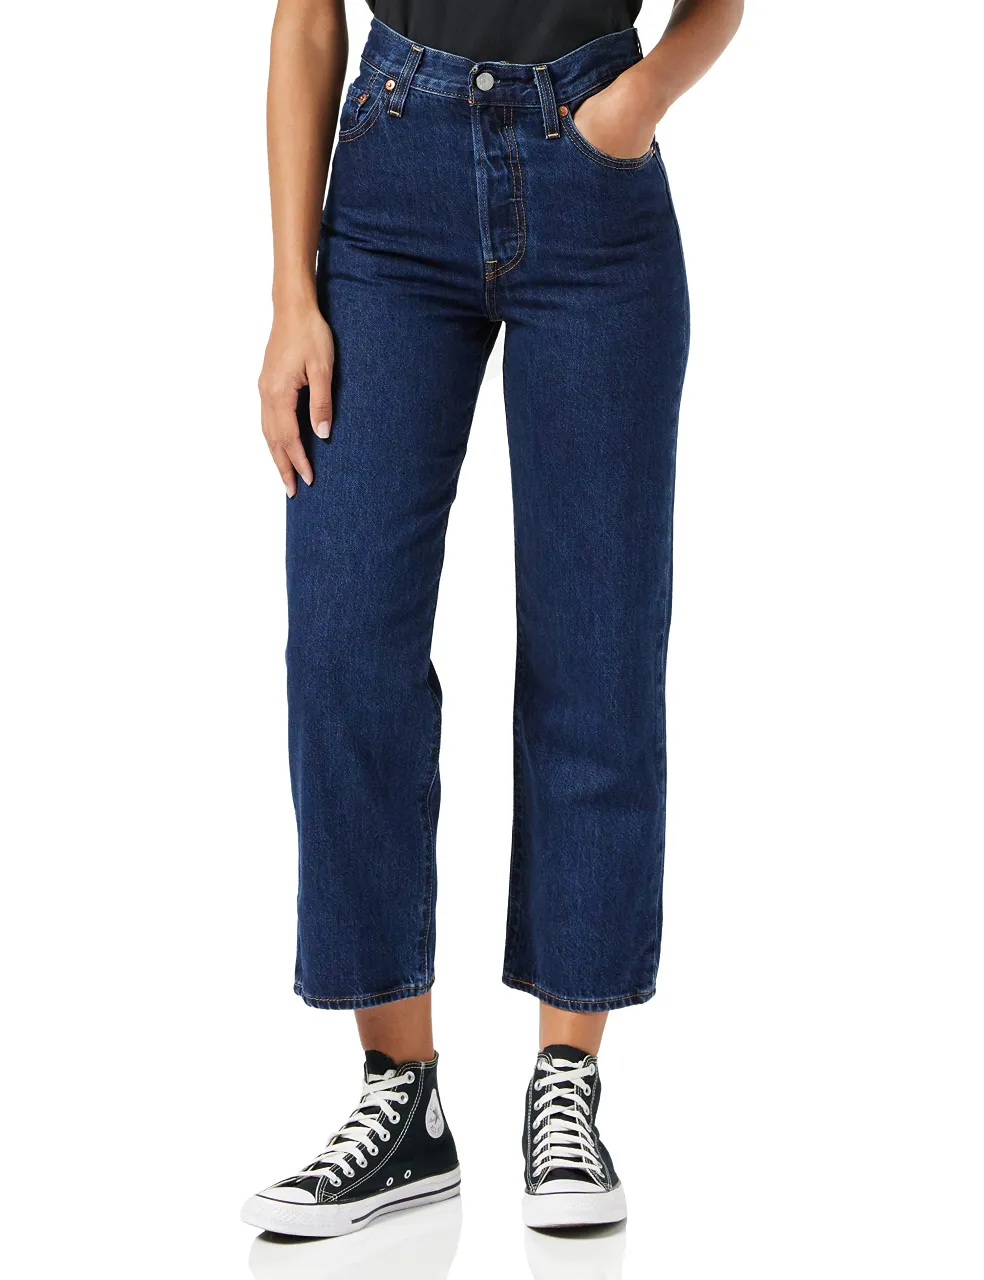 Levi's Women's Ribcage Straight Ankle